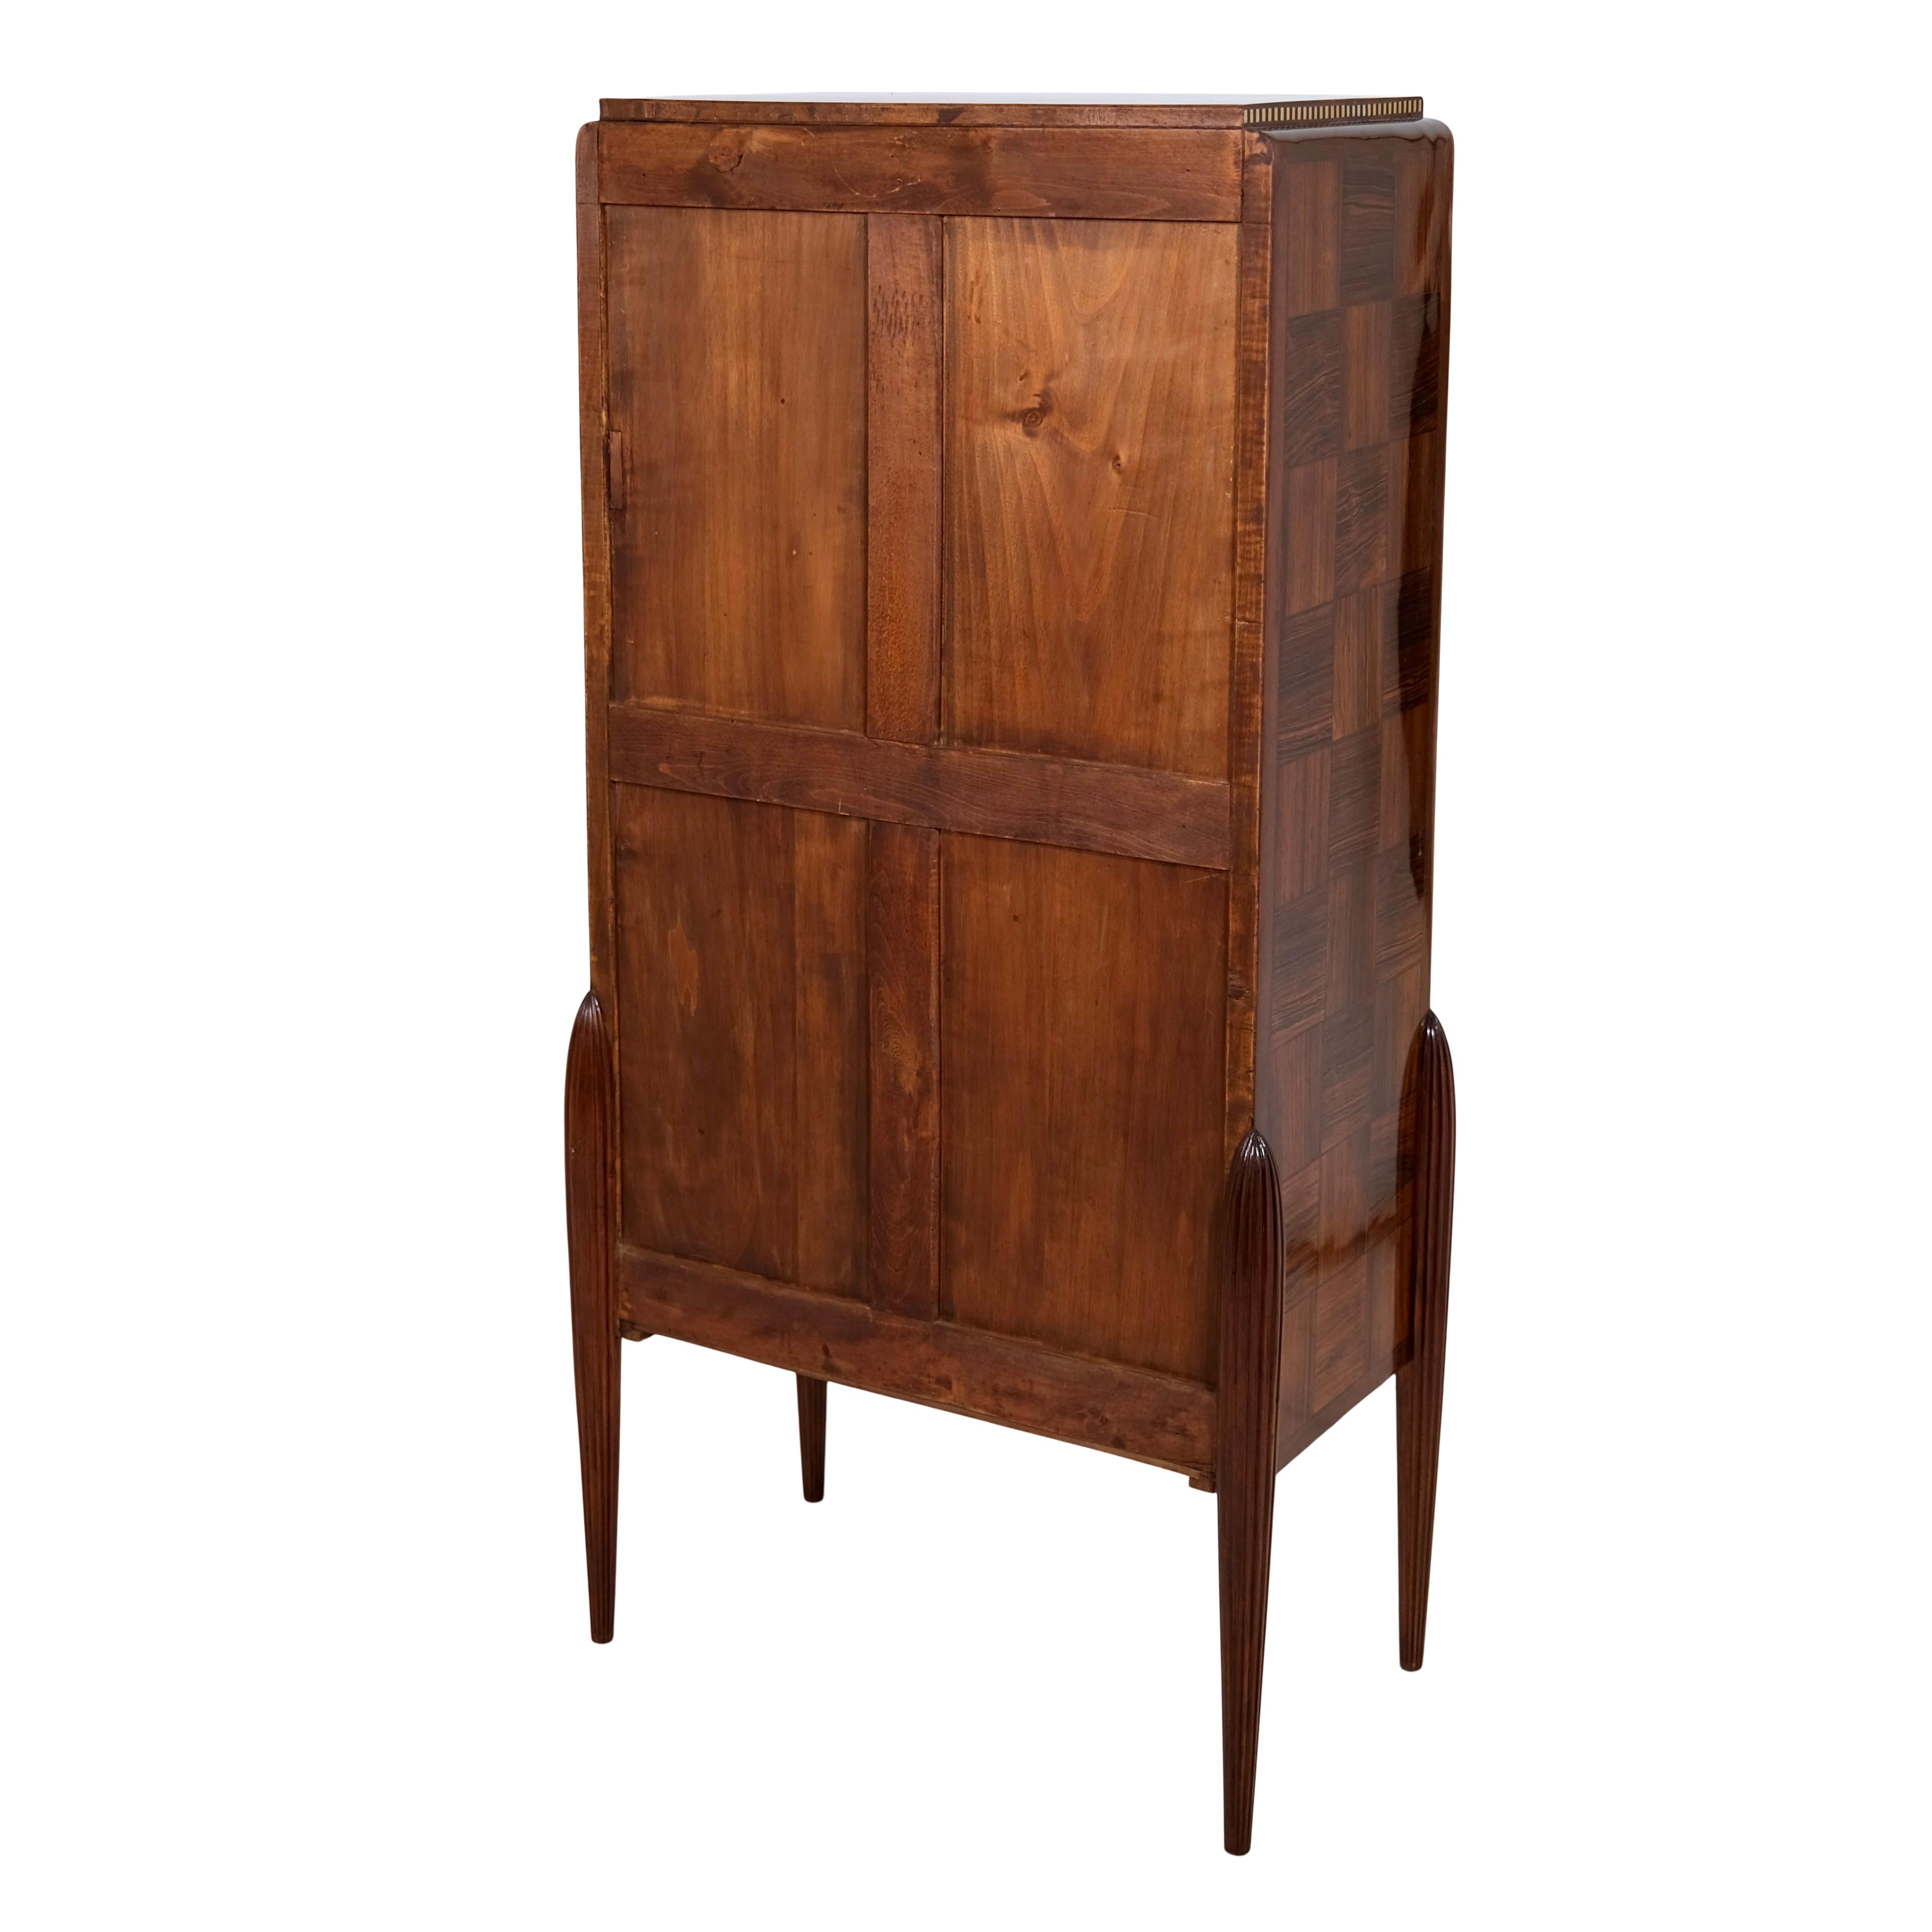 Early French Art Deco Secretaire Desk with Marquetry and Inlays For Sale 10